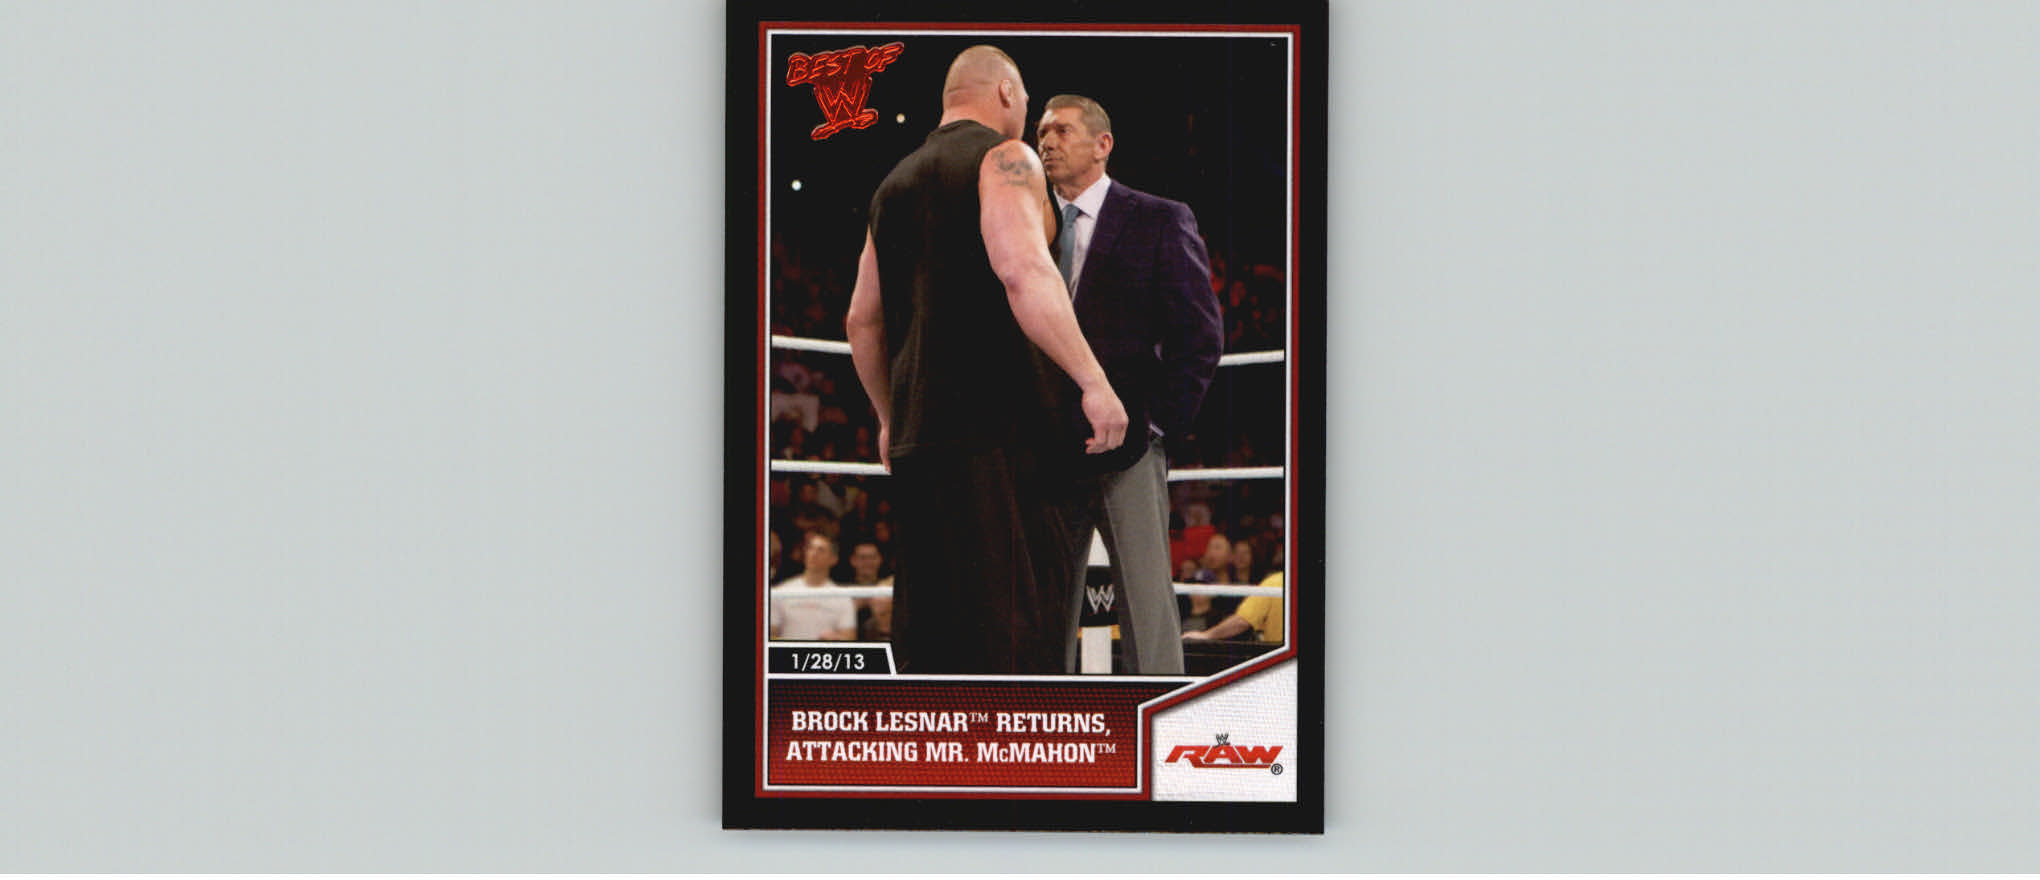 2013 Topps Best of WWE #86 Brock Lesnar Returns, Attacking Mr. McMahon